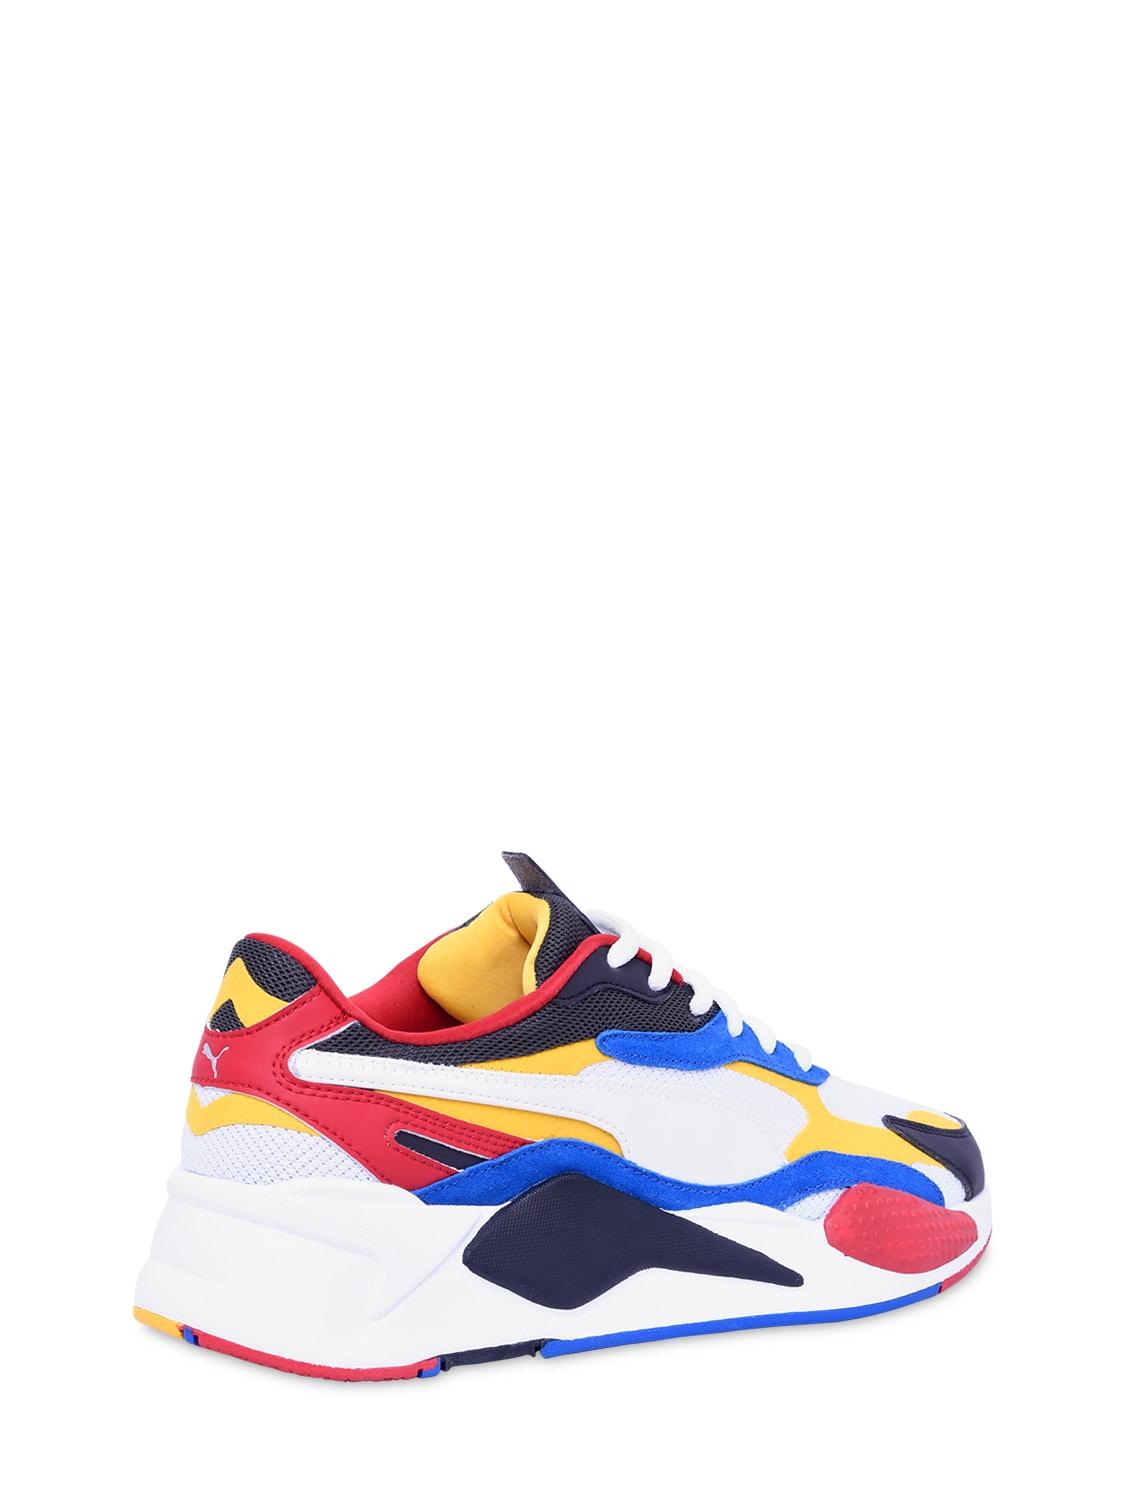 Puma Select Synthetic Rs-x3 Puzzle Sneakers in White/Yellow (Blue) | Lyst